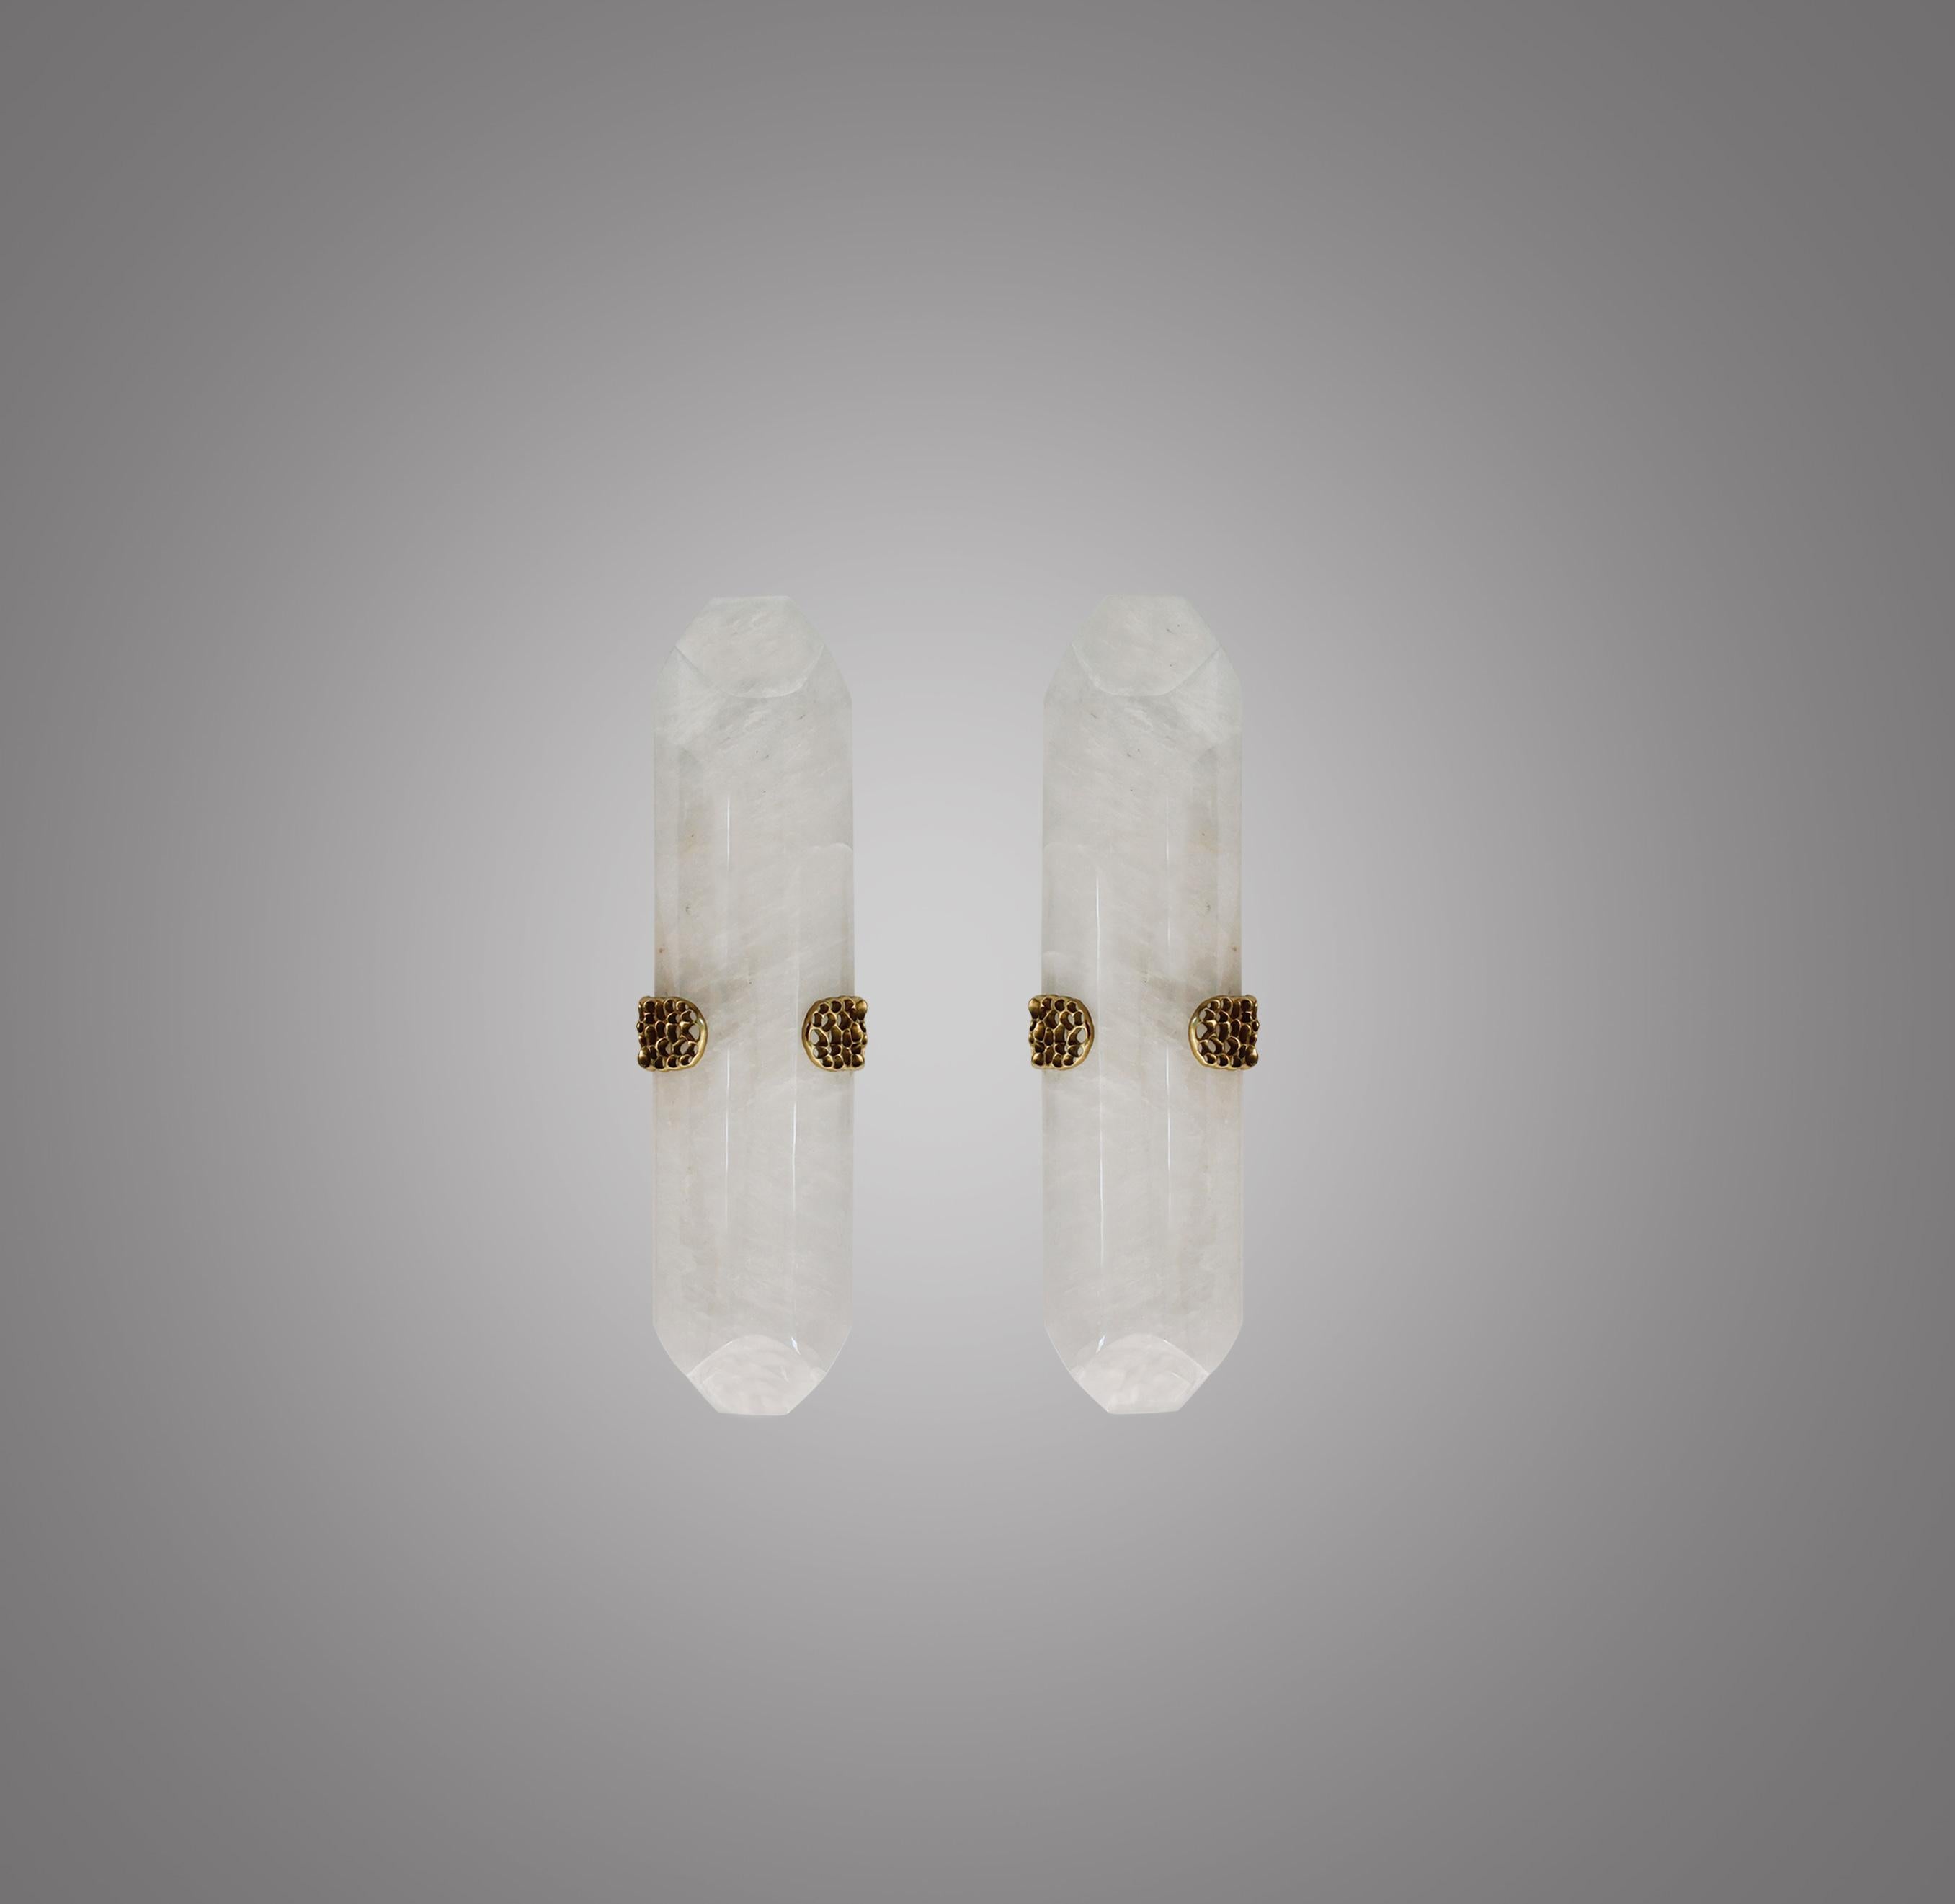 Pair of TDW rock crystal sconces with polish brass decoration. Created by Phoenix Gallery, NYC.
Each sconce installs 2 sockets. 120watts max. Led light bulbs supplied.
Custom size and metal finish upon request.